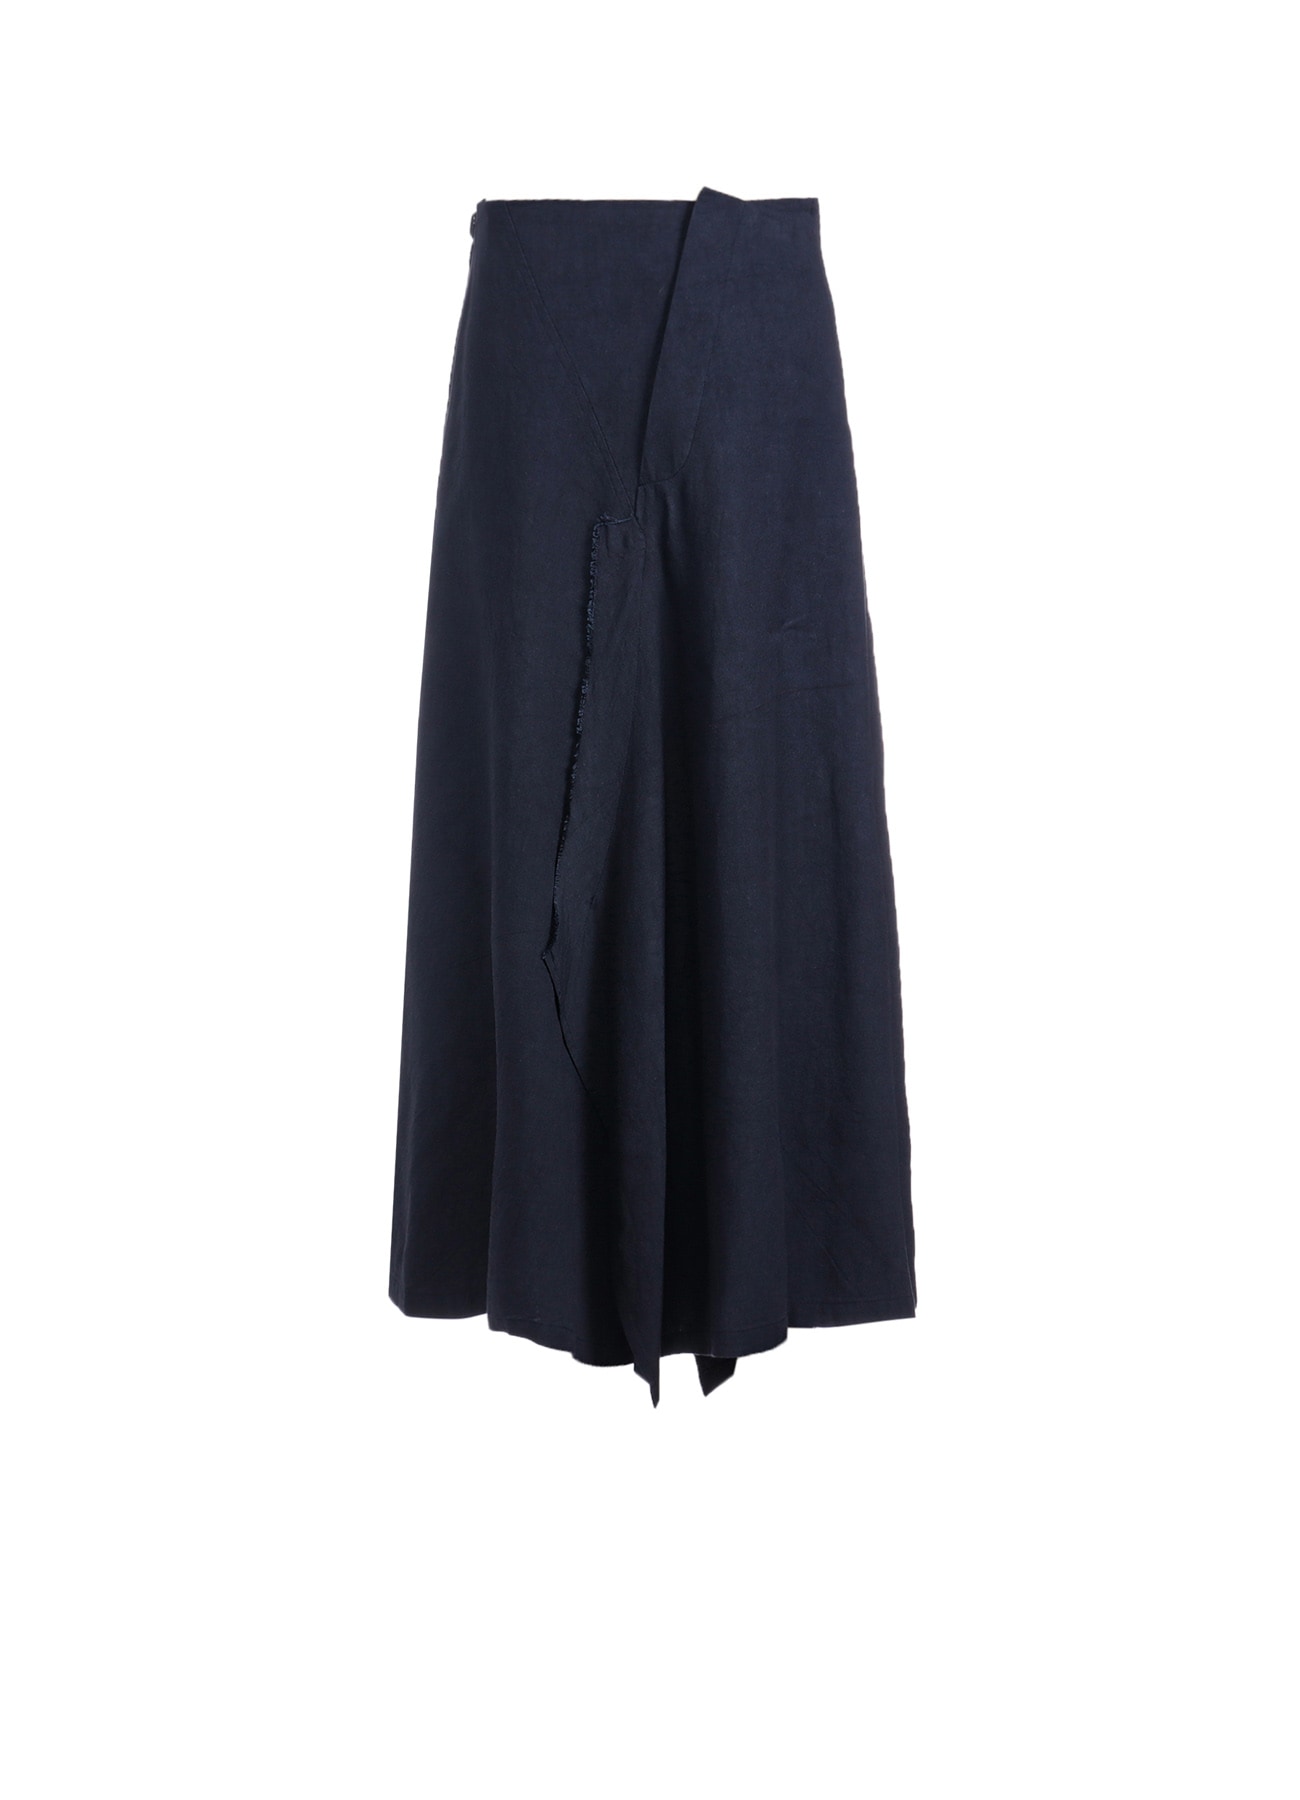 TWILL GARMENT WASH LEFT SIDE PATCH SKIRT PANTS